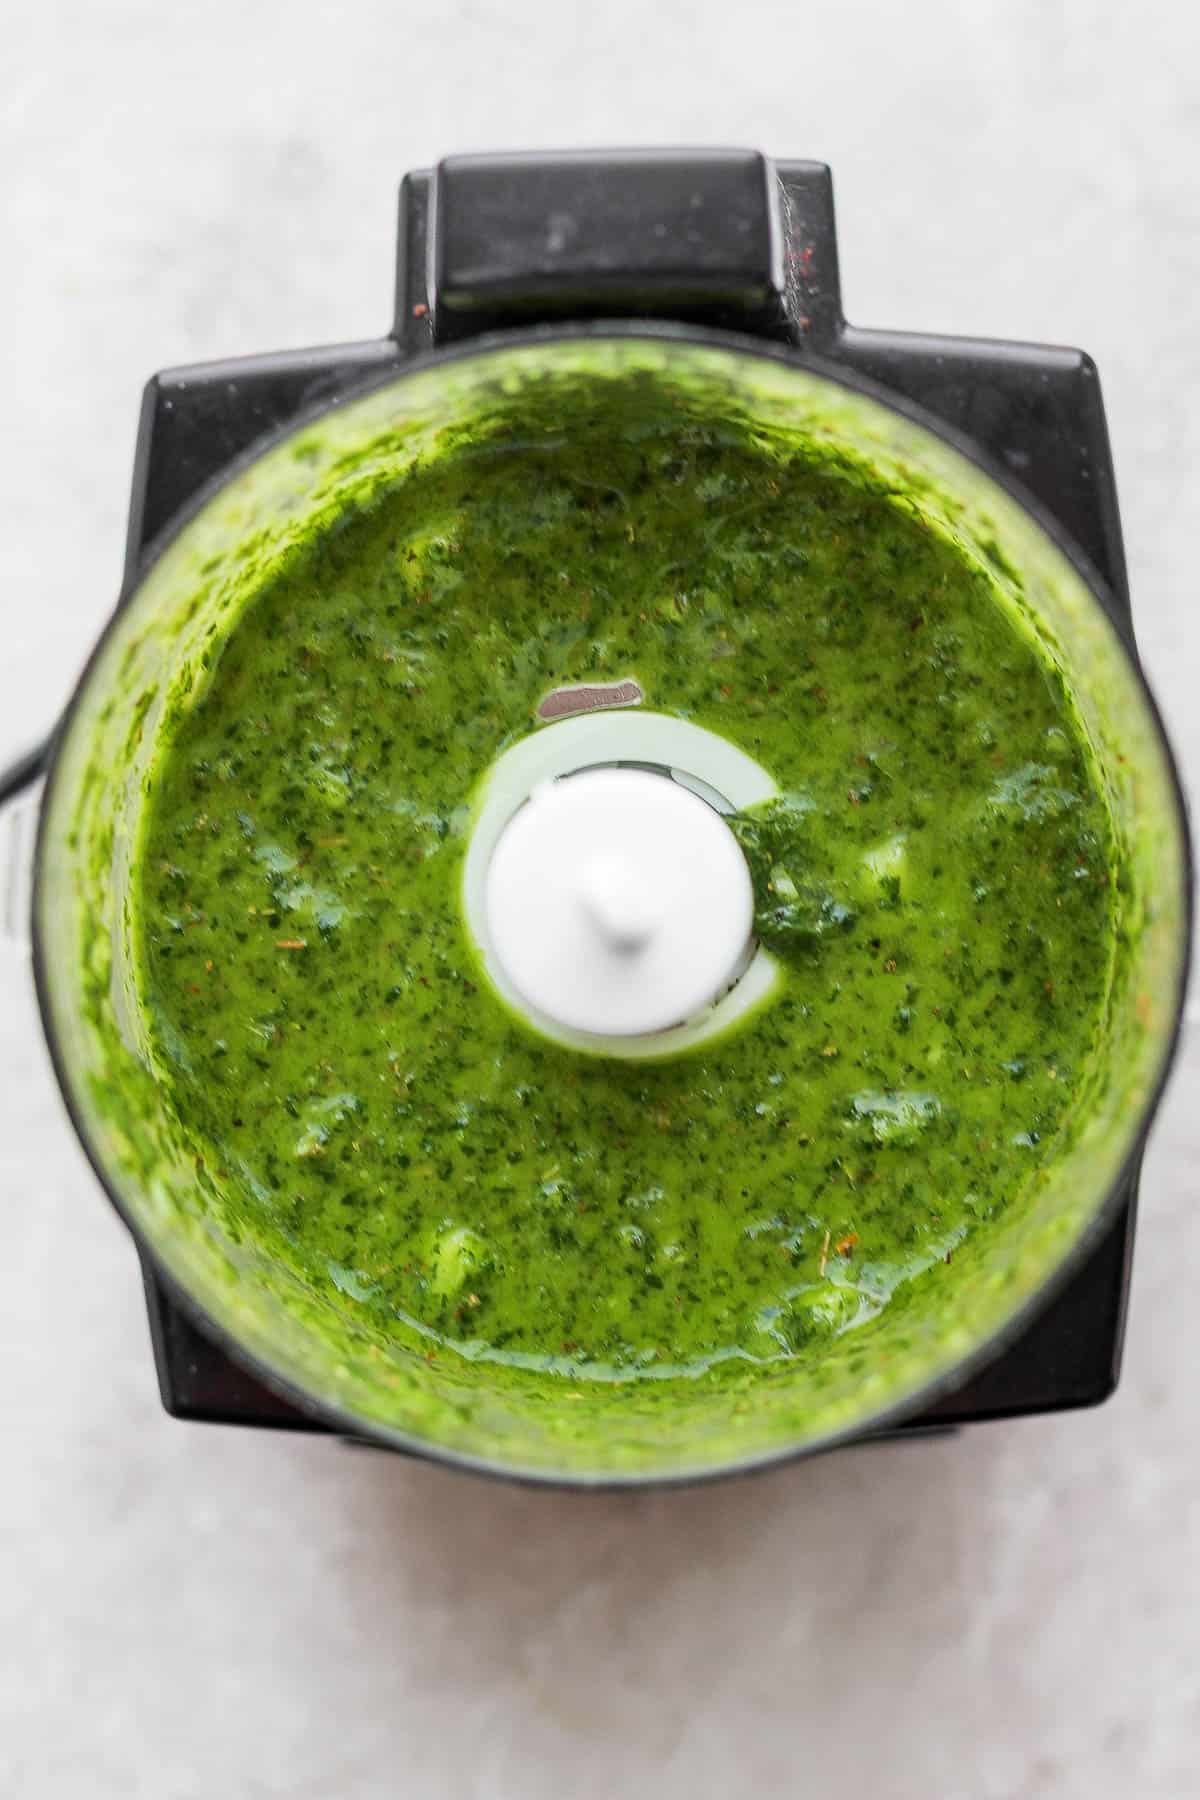 All of the chimichurri ingredients blended in the food processor.